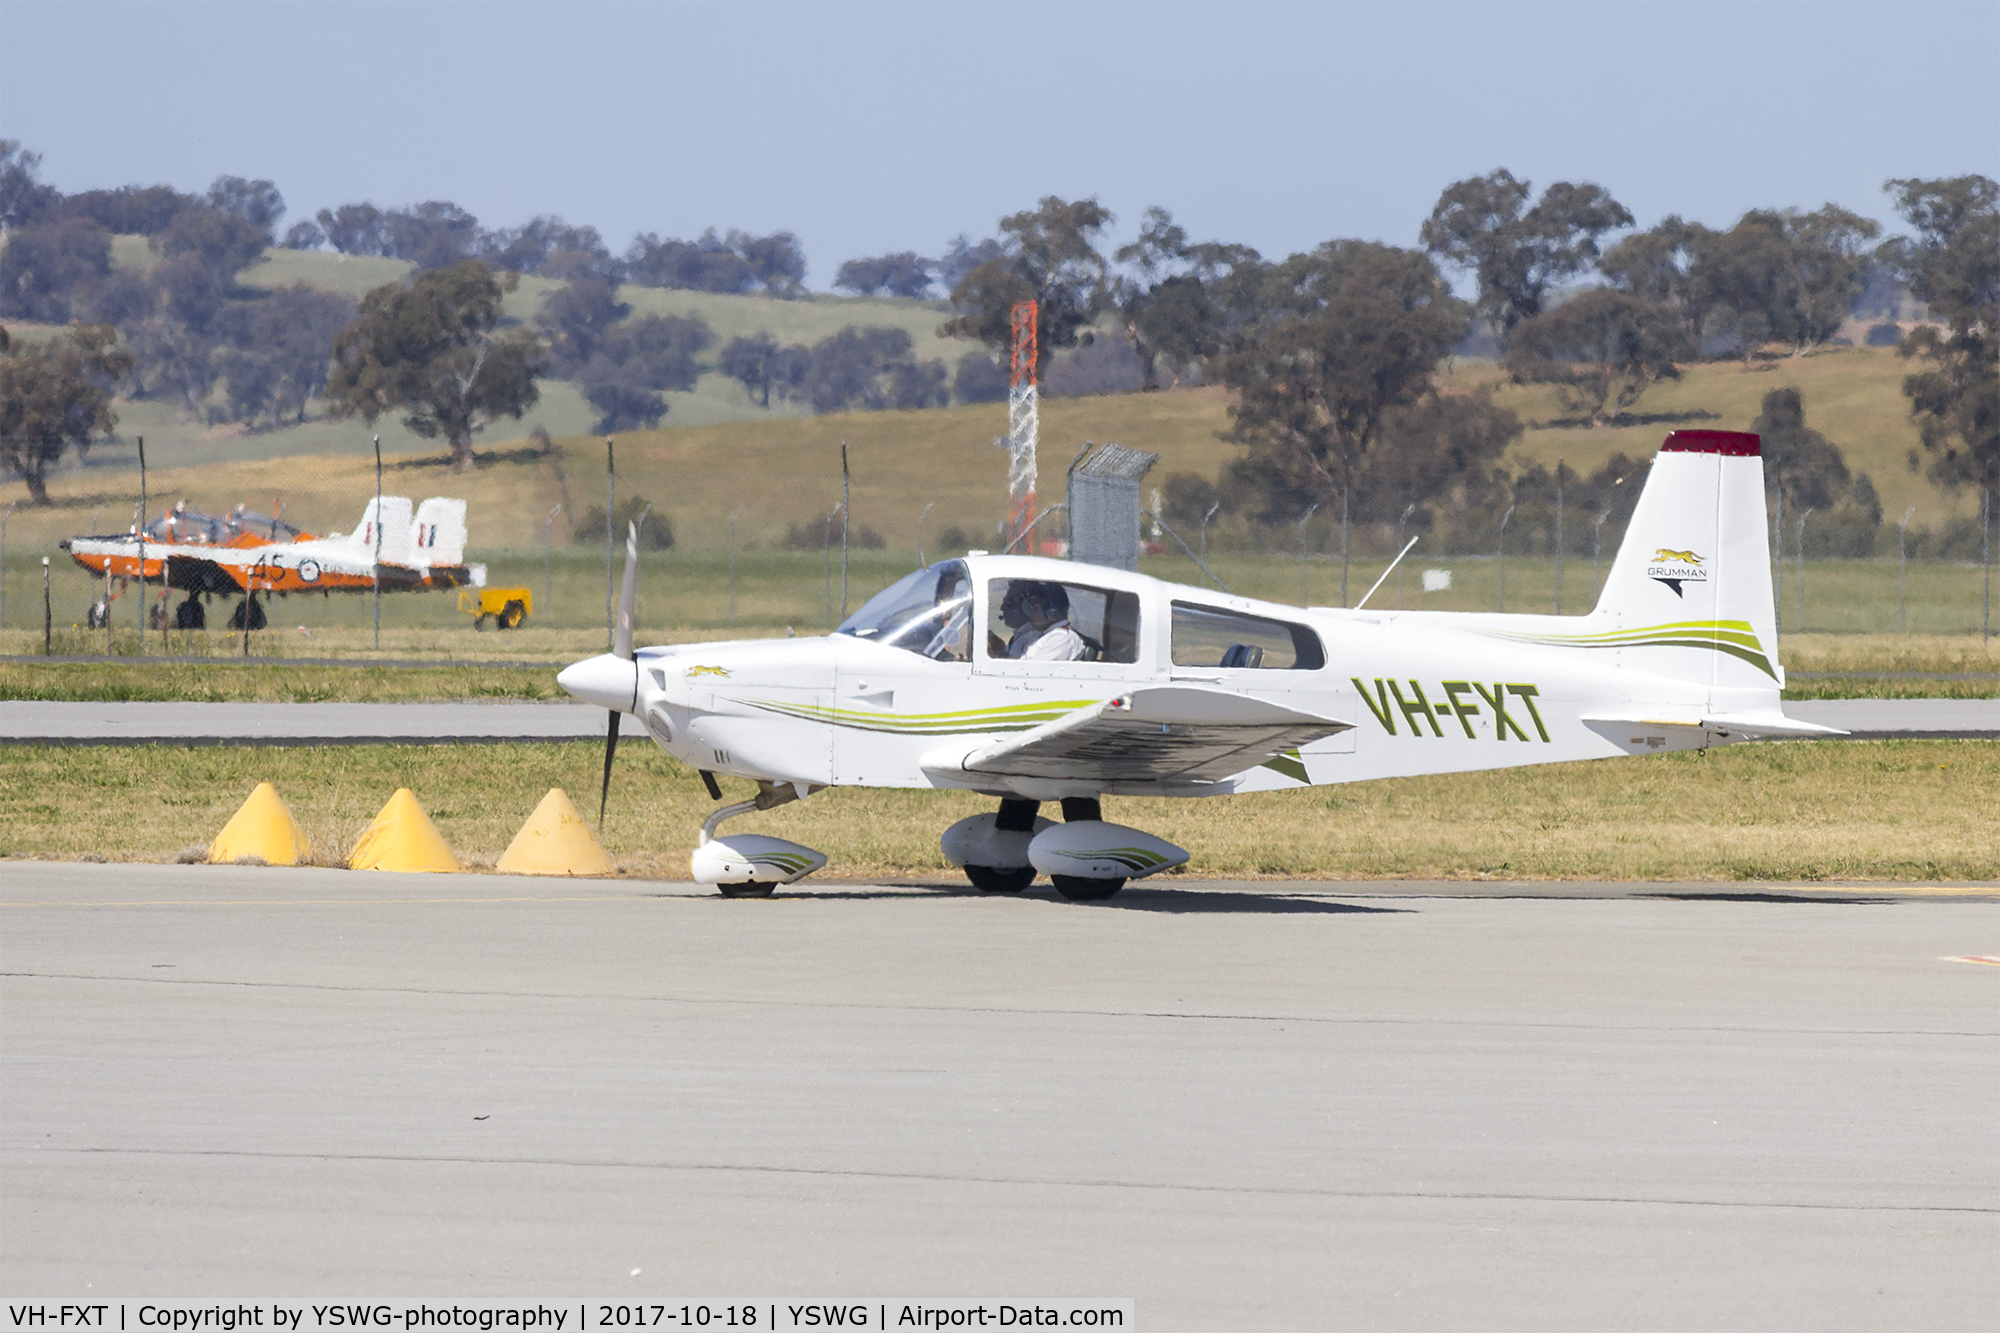 VH-FXT, 1975 American Aircraft Corp AA-5A C/N AA5A-0016, American AA-5A Traveler (VH-FXT) taxiing at Wagga Wagga Airport.